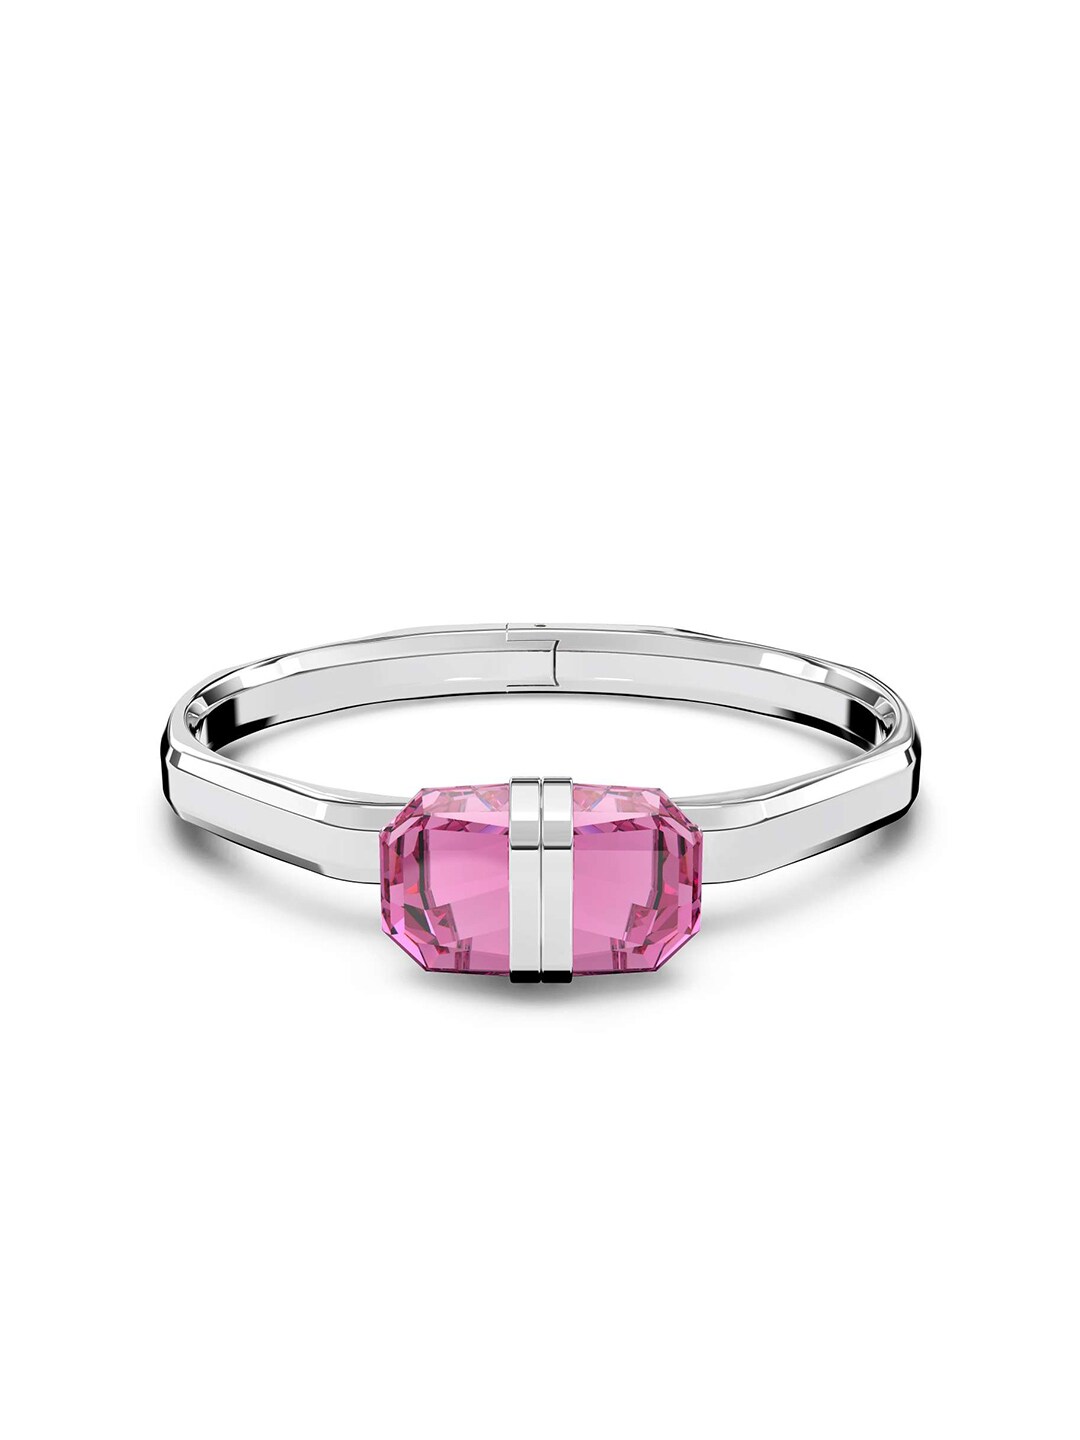 SWAROVSKI Women Silver-Plated Pink Crystals Bangle-Style Bracelet Price in India